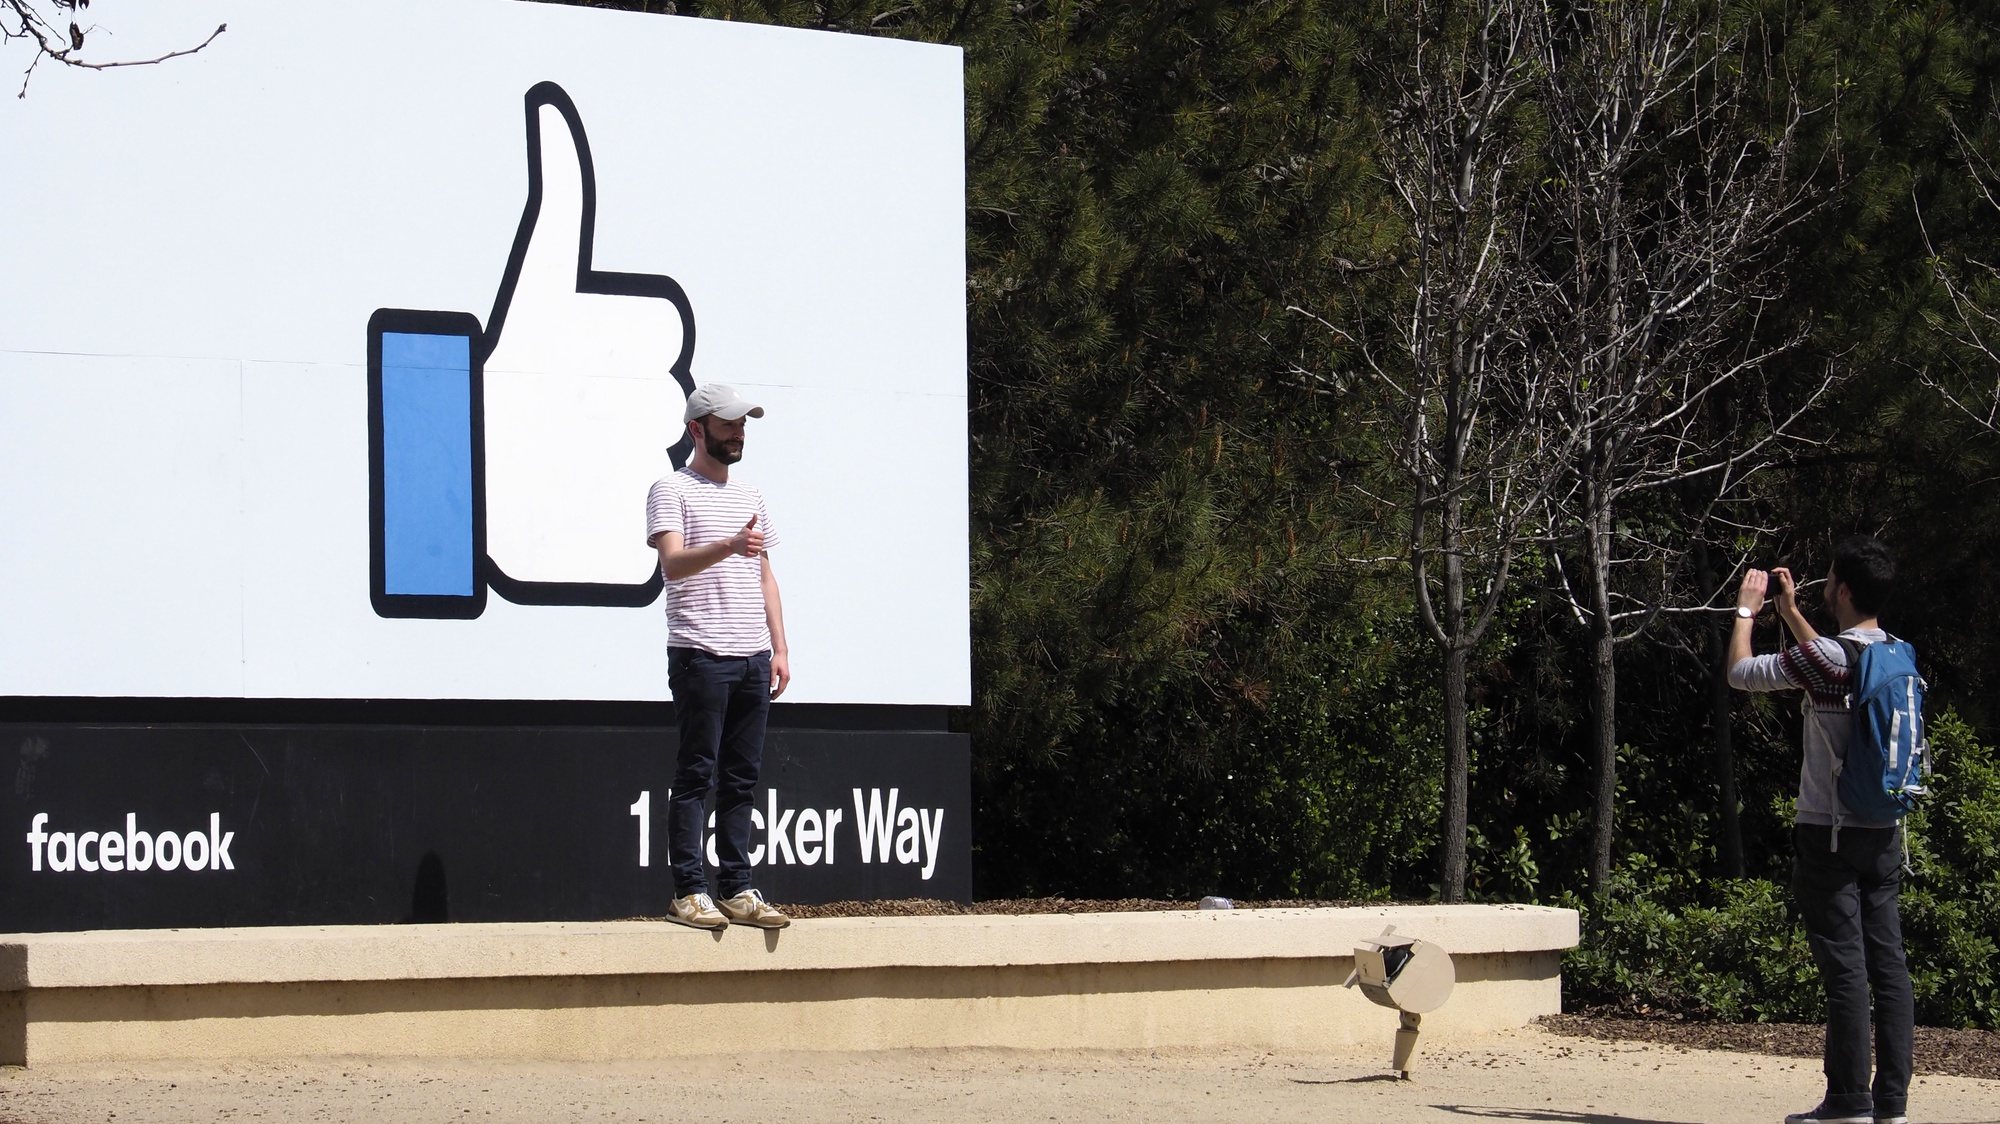 epa08967901 (FILE) -  A person has his picture taken in from of Facebook&#039;s &#039;Like&#039; icon signage in front of their campus building in Menlo Park, California, USA, 30 March 2018 (reissued 26 January 2021). Facebook is to publish their 4th quarter 2020 results on 27 January 2021.  EPA/JOHN G. MABANGLO *** Local Caption *** 54232824